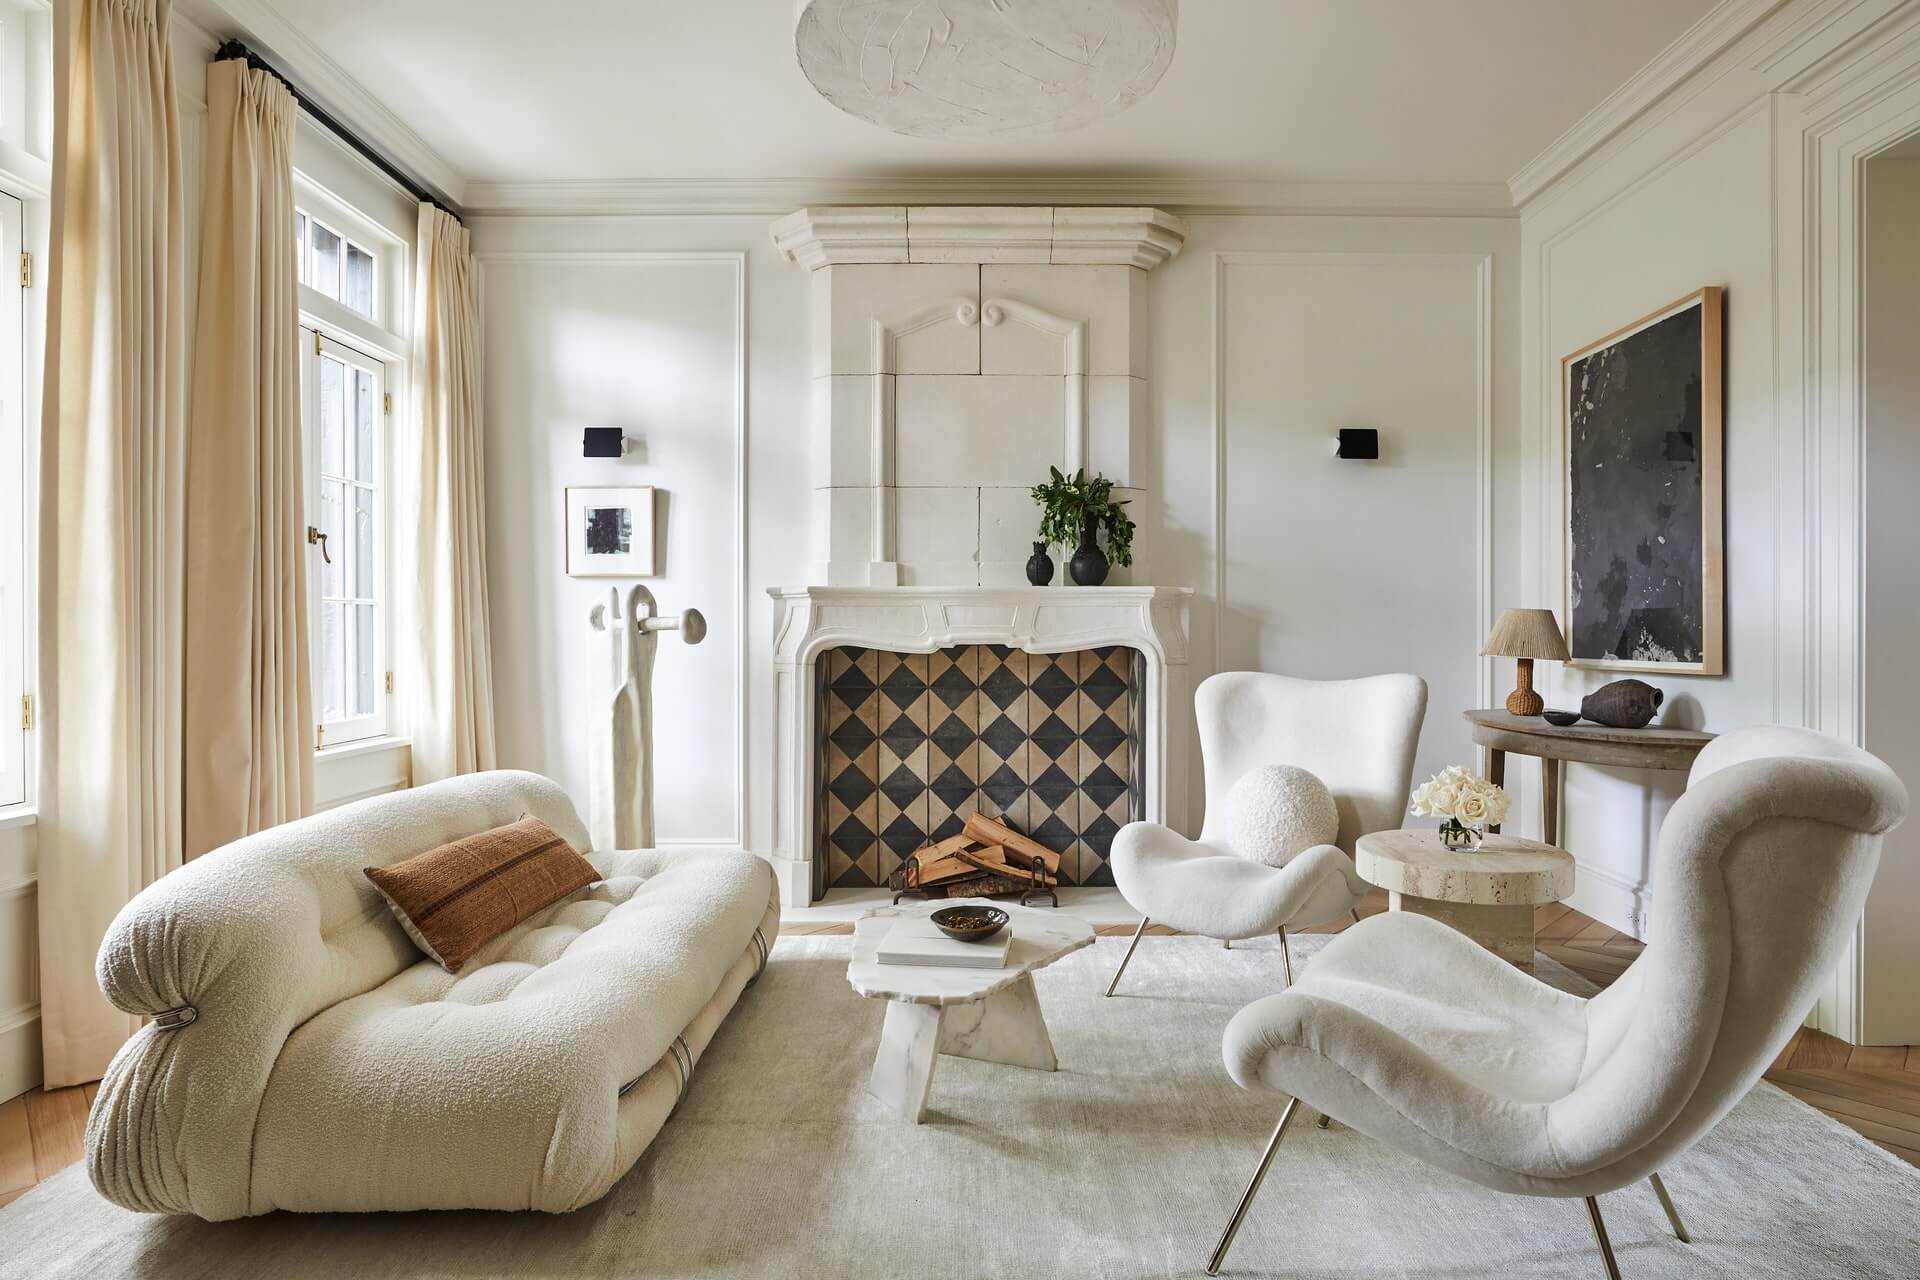 Neutral living room in historic building in washington dc, designed by Jeremiah Brent